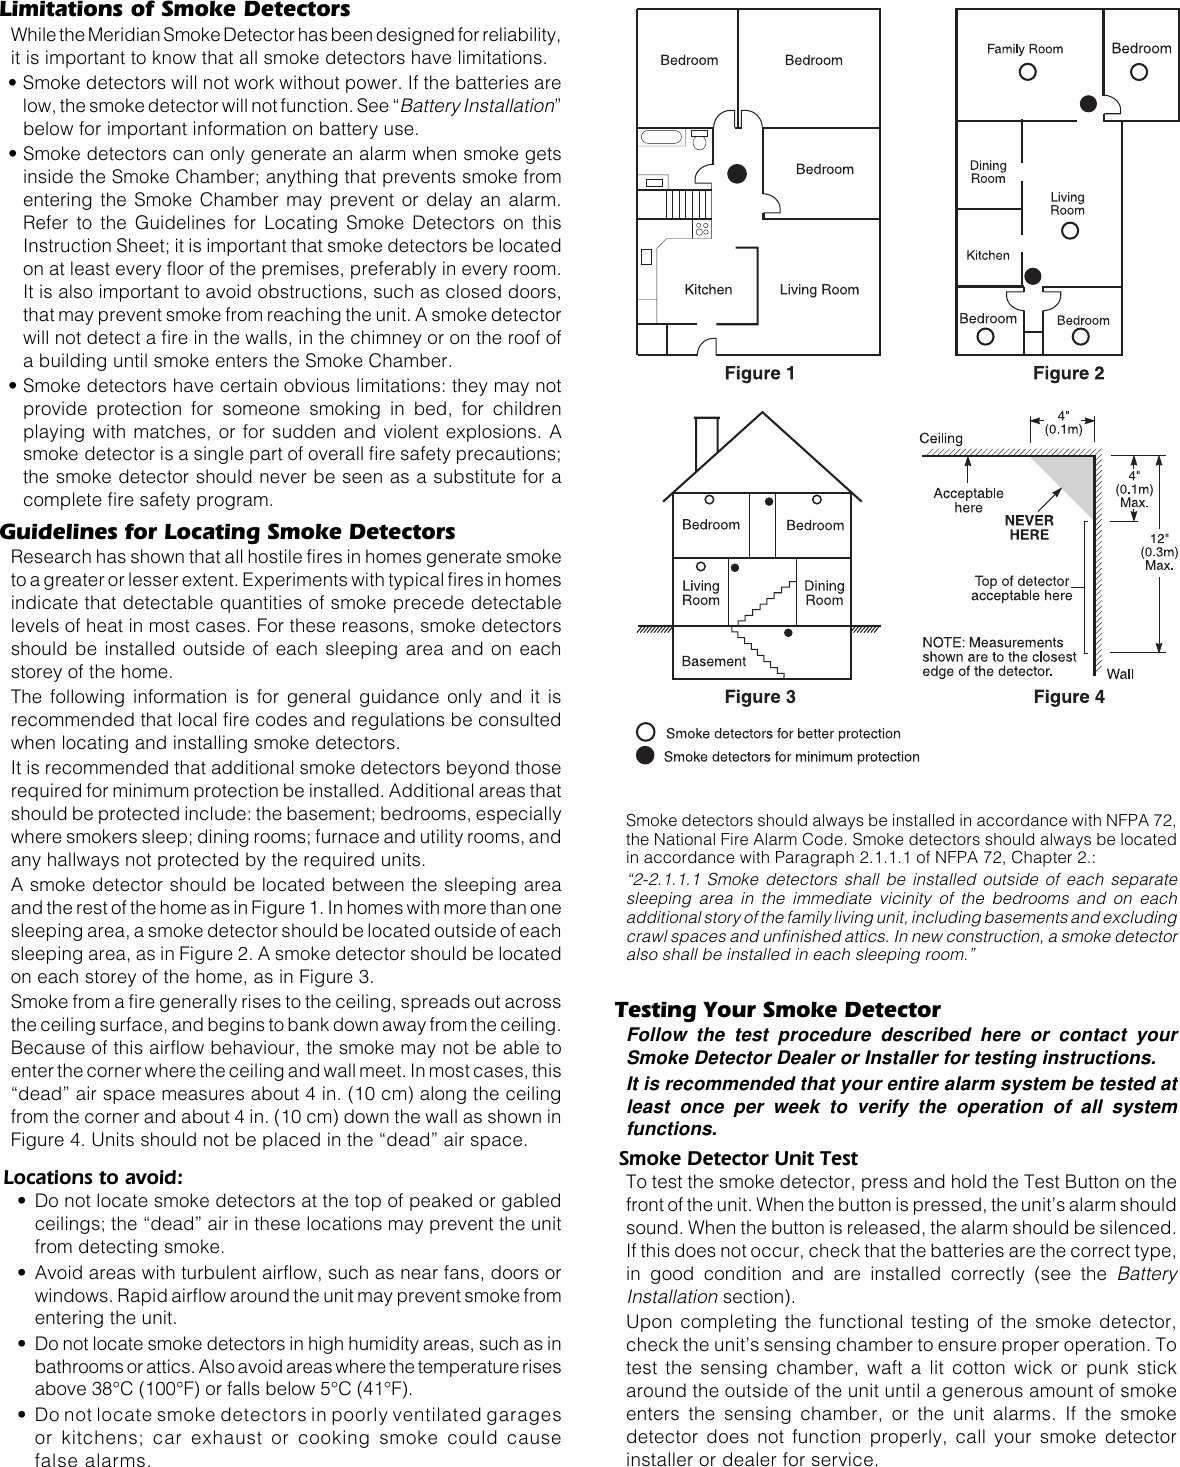 Limitations of Smoke DetectorsWhile the Meridian Smoke Detector has been designed for reliability,it is important to know that all smoke detectors have limitations.• Smoke detectors will not work without power. If the batteries arelow, the smoke detector will not function. See “Battery Installation”below for important information on battery use.• Smoke detectors can only generate an alarm when smoke getsinside the Smoke Chamber; anything that prevents smoke fromentering the Smoke Chamber may prevent or delay an alarm.Refer to the Guidelines for Locating Smoke Detectors on thisInstruction Sheet; it is important that smoke detectors be locatedon at least every floor of the premises, preferably in every room.It is also important to avoid obstructions, such as closed doors,that may prevent smoke from reaching the unit. A smoke detectorwill not detect a fire in the walls, in the chimney or on the roof ofa building until smoke enters the Smoke Chamber.• Smoke detectors have certain obvious limitations: they may notprovide protection for someone smoking in bed, for childrenplaying with matches, or for sudden and violent explosions. Asmoke detector is a single part of overall fire safety precautions;the smoke detector should never be seen as a substitute for acomplete fire safety program.Guidelines for Locating Smoke DetectorsResearch has shown that all hostile fires in homes generate smoketo a greater or lesser extent. Experiments with typical fires in homesindicate that detectable quantities of smoke precede detectablelevels of heat in most cases. For these reasons, smoke detectorsshould be installed outside of each sleeping area and on eachstorey of the home.The following information is for general guidance only and it isrecommended that local fire codes and regulations be consultedwhen locating and installing smoke detectors.It is recommended that additional smoke detectors beyond thoserequired for minimum protection be installed. Additional areas thatshould be protected include: the basement; bedrooms, especiallywhere smokers sleep; dining rooms; furnace and utility rooms, andany hallways not protected by the required units.A smoke detector should be located between the sleeping areaand the rest of the home as in Figure 1. In homes with more than onesleeping area, a smoke detector should be located outside of eachsleeping area, as in Figure 2. A smoke detector should be locatedon each storey of the home, as in Figure 3.Smoke from a fire generally rises to the ceiling, spreads out acrossthe ceiling surface, and begins to bank down away from the ceiling.Because of this airflow behaviour, the smoke may not be able toenter the corner where the ceiling and wall meet. In most cases, this“dead” air space measures about 4 in. (10 cm) along the ceilingfrom the corner and about 4 in. (10 cm) down the wall as shown inFigure 4. Units should not be placed in the “dead” air space.Locations to avoid:• Do not locate smoke detectors at the top of peaked or gabledceilings; the “dead” air in these locations may prevent the unitfrom detecting smoke.• Avoid areas with turbulent airflow, such as near fans, doors orwindows. Rapid airflow around the unit may prevent smoke fromentering the unit.• Do not locate smoke detectors in high humidity areas, such as inbathrooms or attics. Also avoid areas where the temperature risesabove 38°C (100°F) or falls below 5°C (41°F).• Do not locate smoke detectors in poorly ventilated garagesor kitchens; car exhaust or cooking smoke could causefalse alarms.Smoke detectors should always be installed in accordance with NFPA 72,the National Fire Alarm Code. Smoke detectors should always be locatedin accordance with Paragraph 2.1.1.1 of NFPA 72, Chapter 2.:“2-2.1.1.1 Smoke detectors shall be installed outside of each separatesleeping area in the immediate vicinity of the bedrooms and on eachadditional story of the family living unit, including basements and excludingcrawl spaces and unfinished attics. In new construction, a smoke detectoralso shall be installed in each sleeping room.”Testing Your Smoke DetectorFollow the test procedure described here or contact yourSmoke Detector Dealer or Installer for testing instructions.It is recommended that your entire alarm system be tested atleast once per week to verify the operation of all systemfunctions.Smoke Detector Unit TestTo test the smoke detector, press and hold the Test Button on thefront of the unit. When the button is pressed, the unit’s alarm shouldsound. When the button is released, the alarm should be silenced.If this does not occur, check that the batteries are the correct type,in good condition and are installed correctly (see the BatteryInstallation section).Upon completing the functional testing of the smoke detector,check the unit’s sensing chamber to ensure proper operation. Totest the sensing chamber, waft a lit cotton wick or punk stickaround the outside of the unit until a generous amount of smokeenters the sensing chamber, or the unit alarms. If the smokedetector does not function properly, call your smoke detectorinstaller or dealer for service.